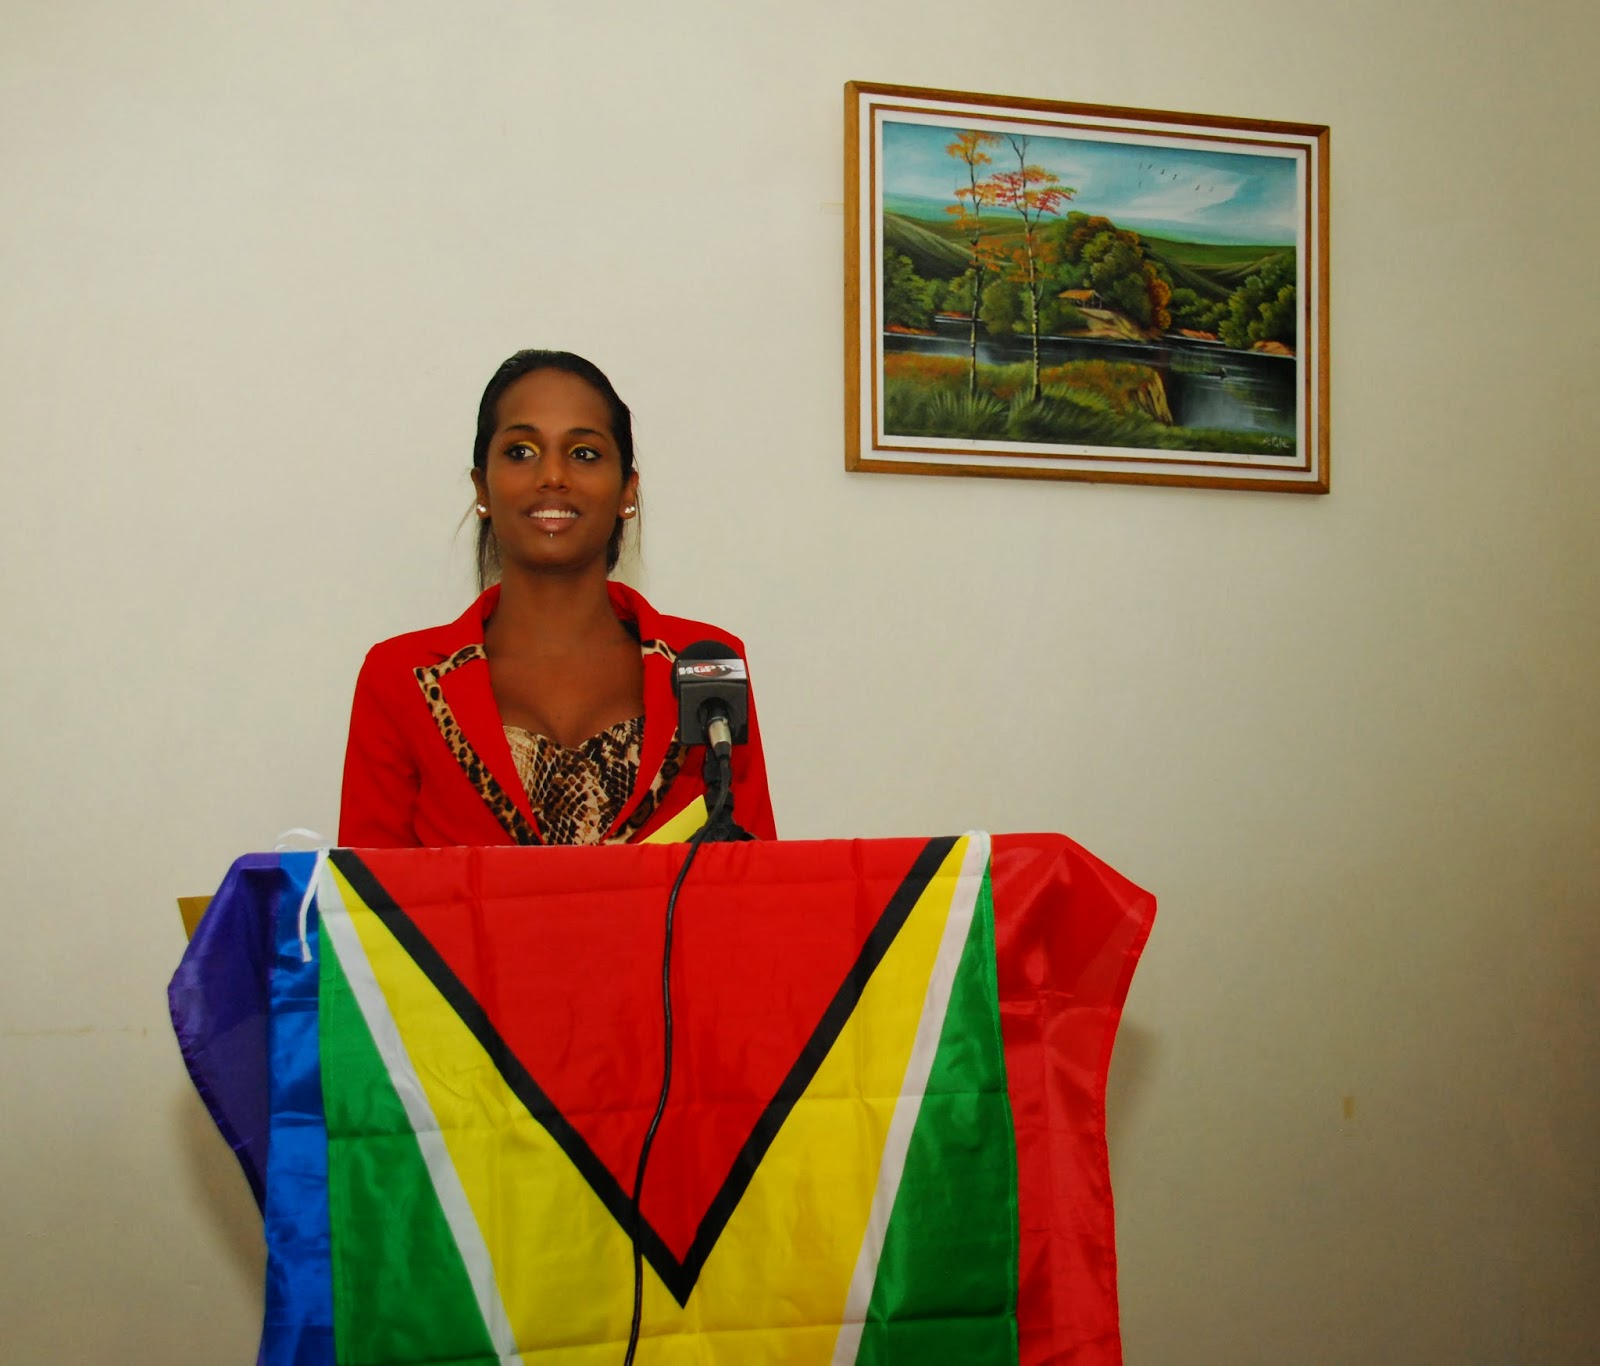 Sasod Guyana Stand Against Transphobia” Photo Exhibition At National Library Until Saturday